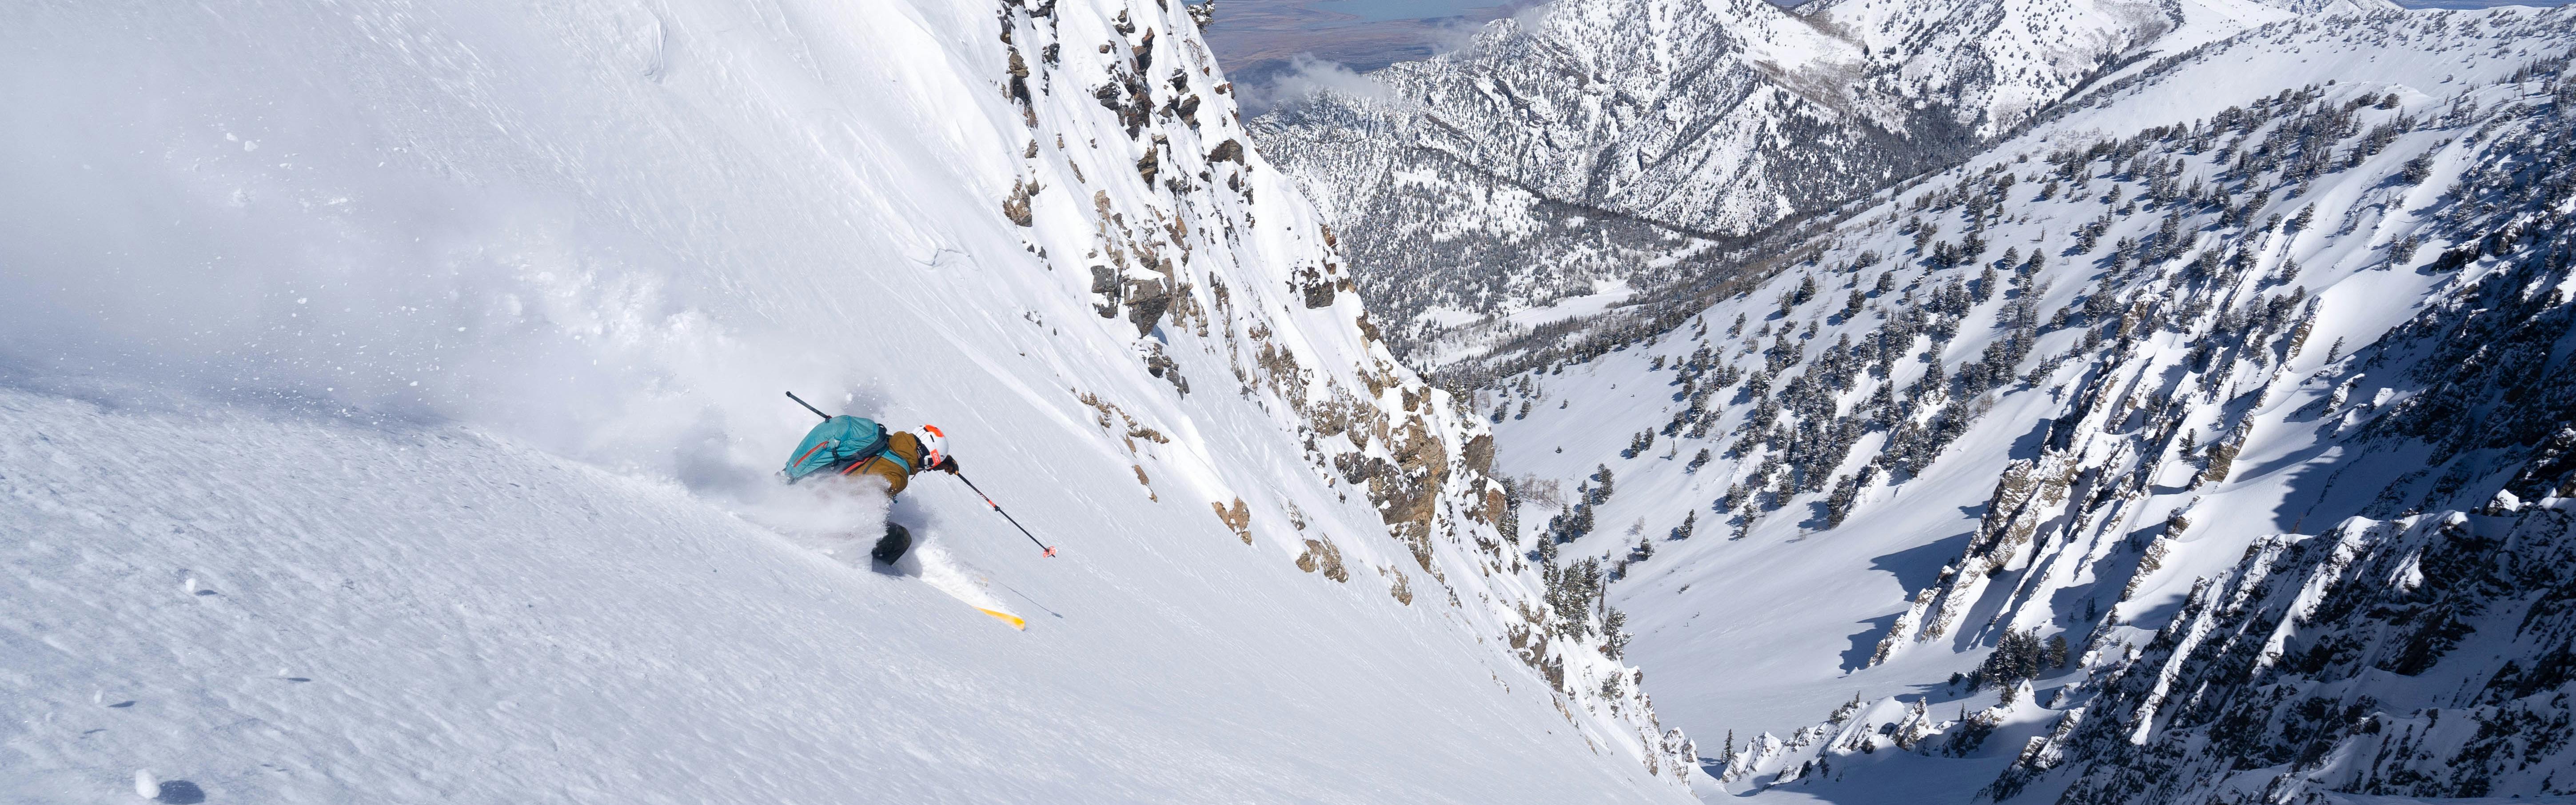 A skier turning down a steep, snowy mountain. 